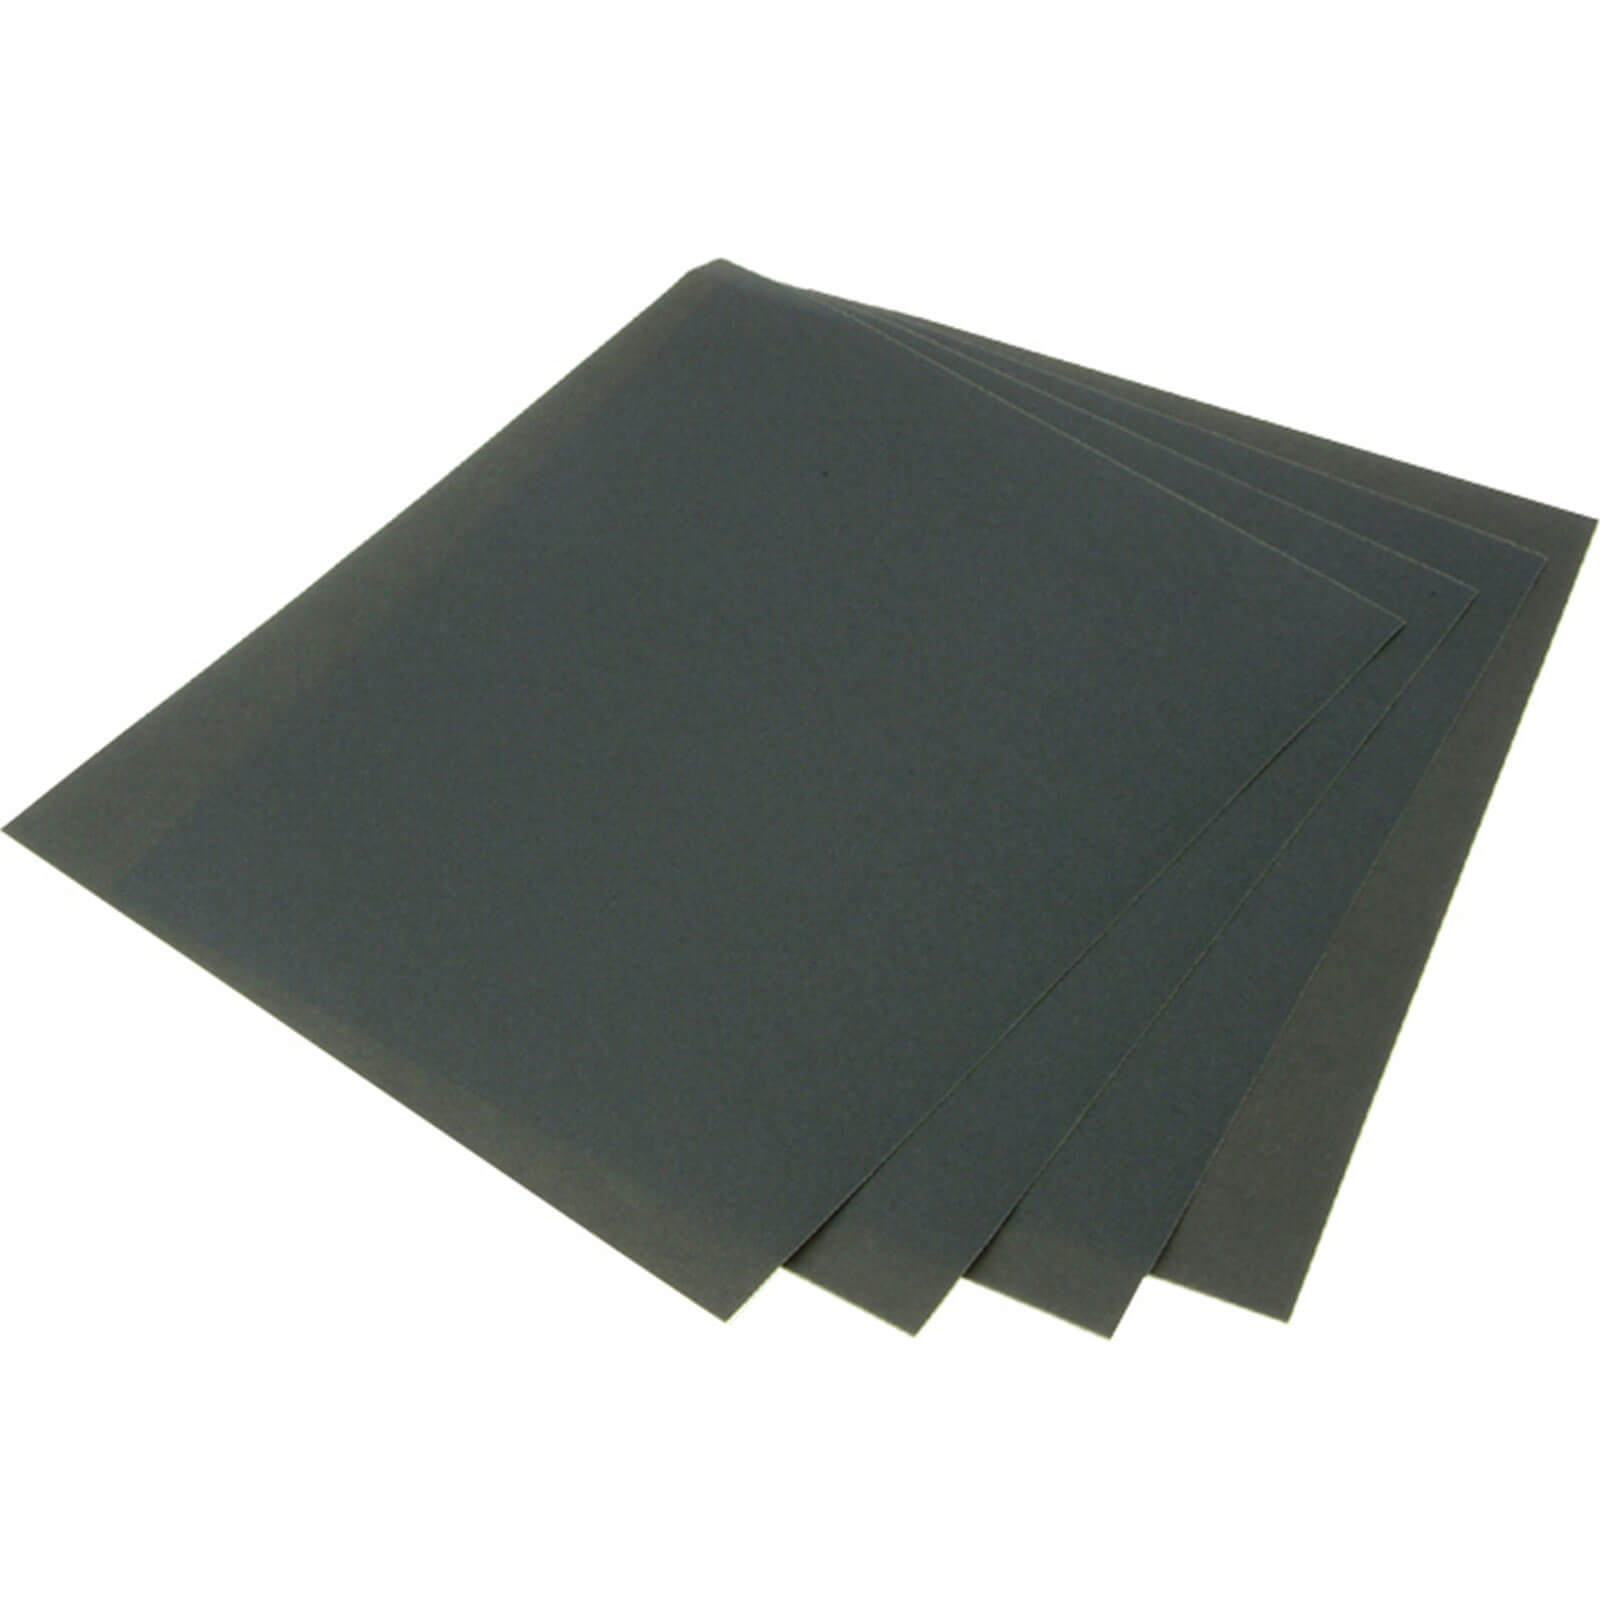 Image of Faithfull Wet and Dry Paper Sheets 230 x 280mm 800g Pack of 25